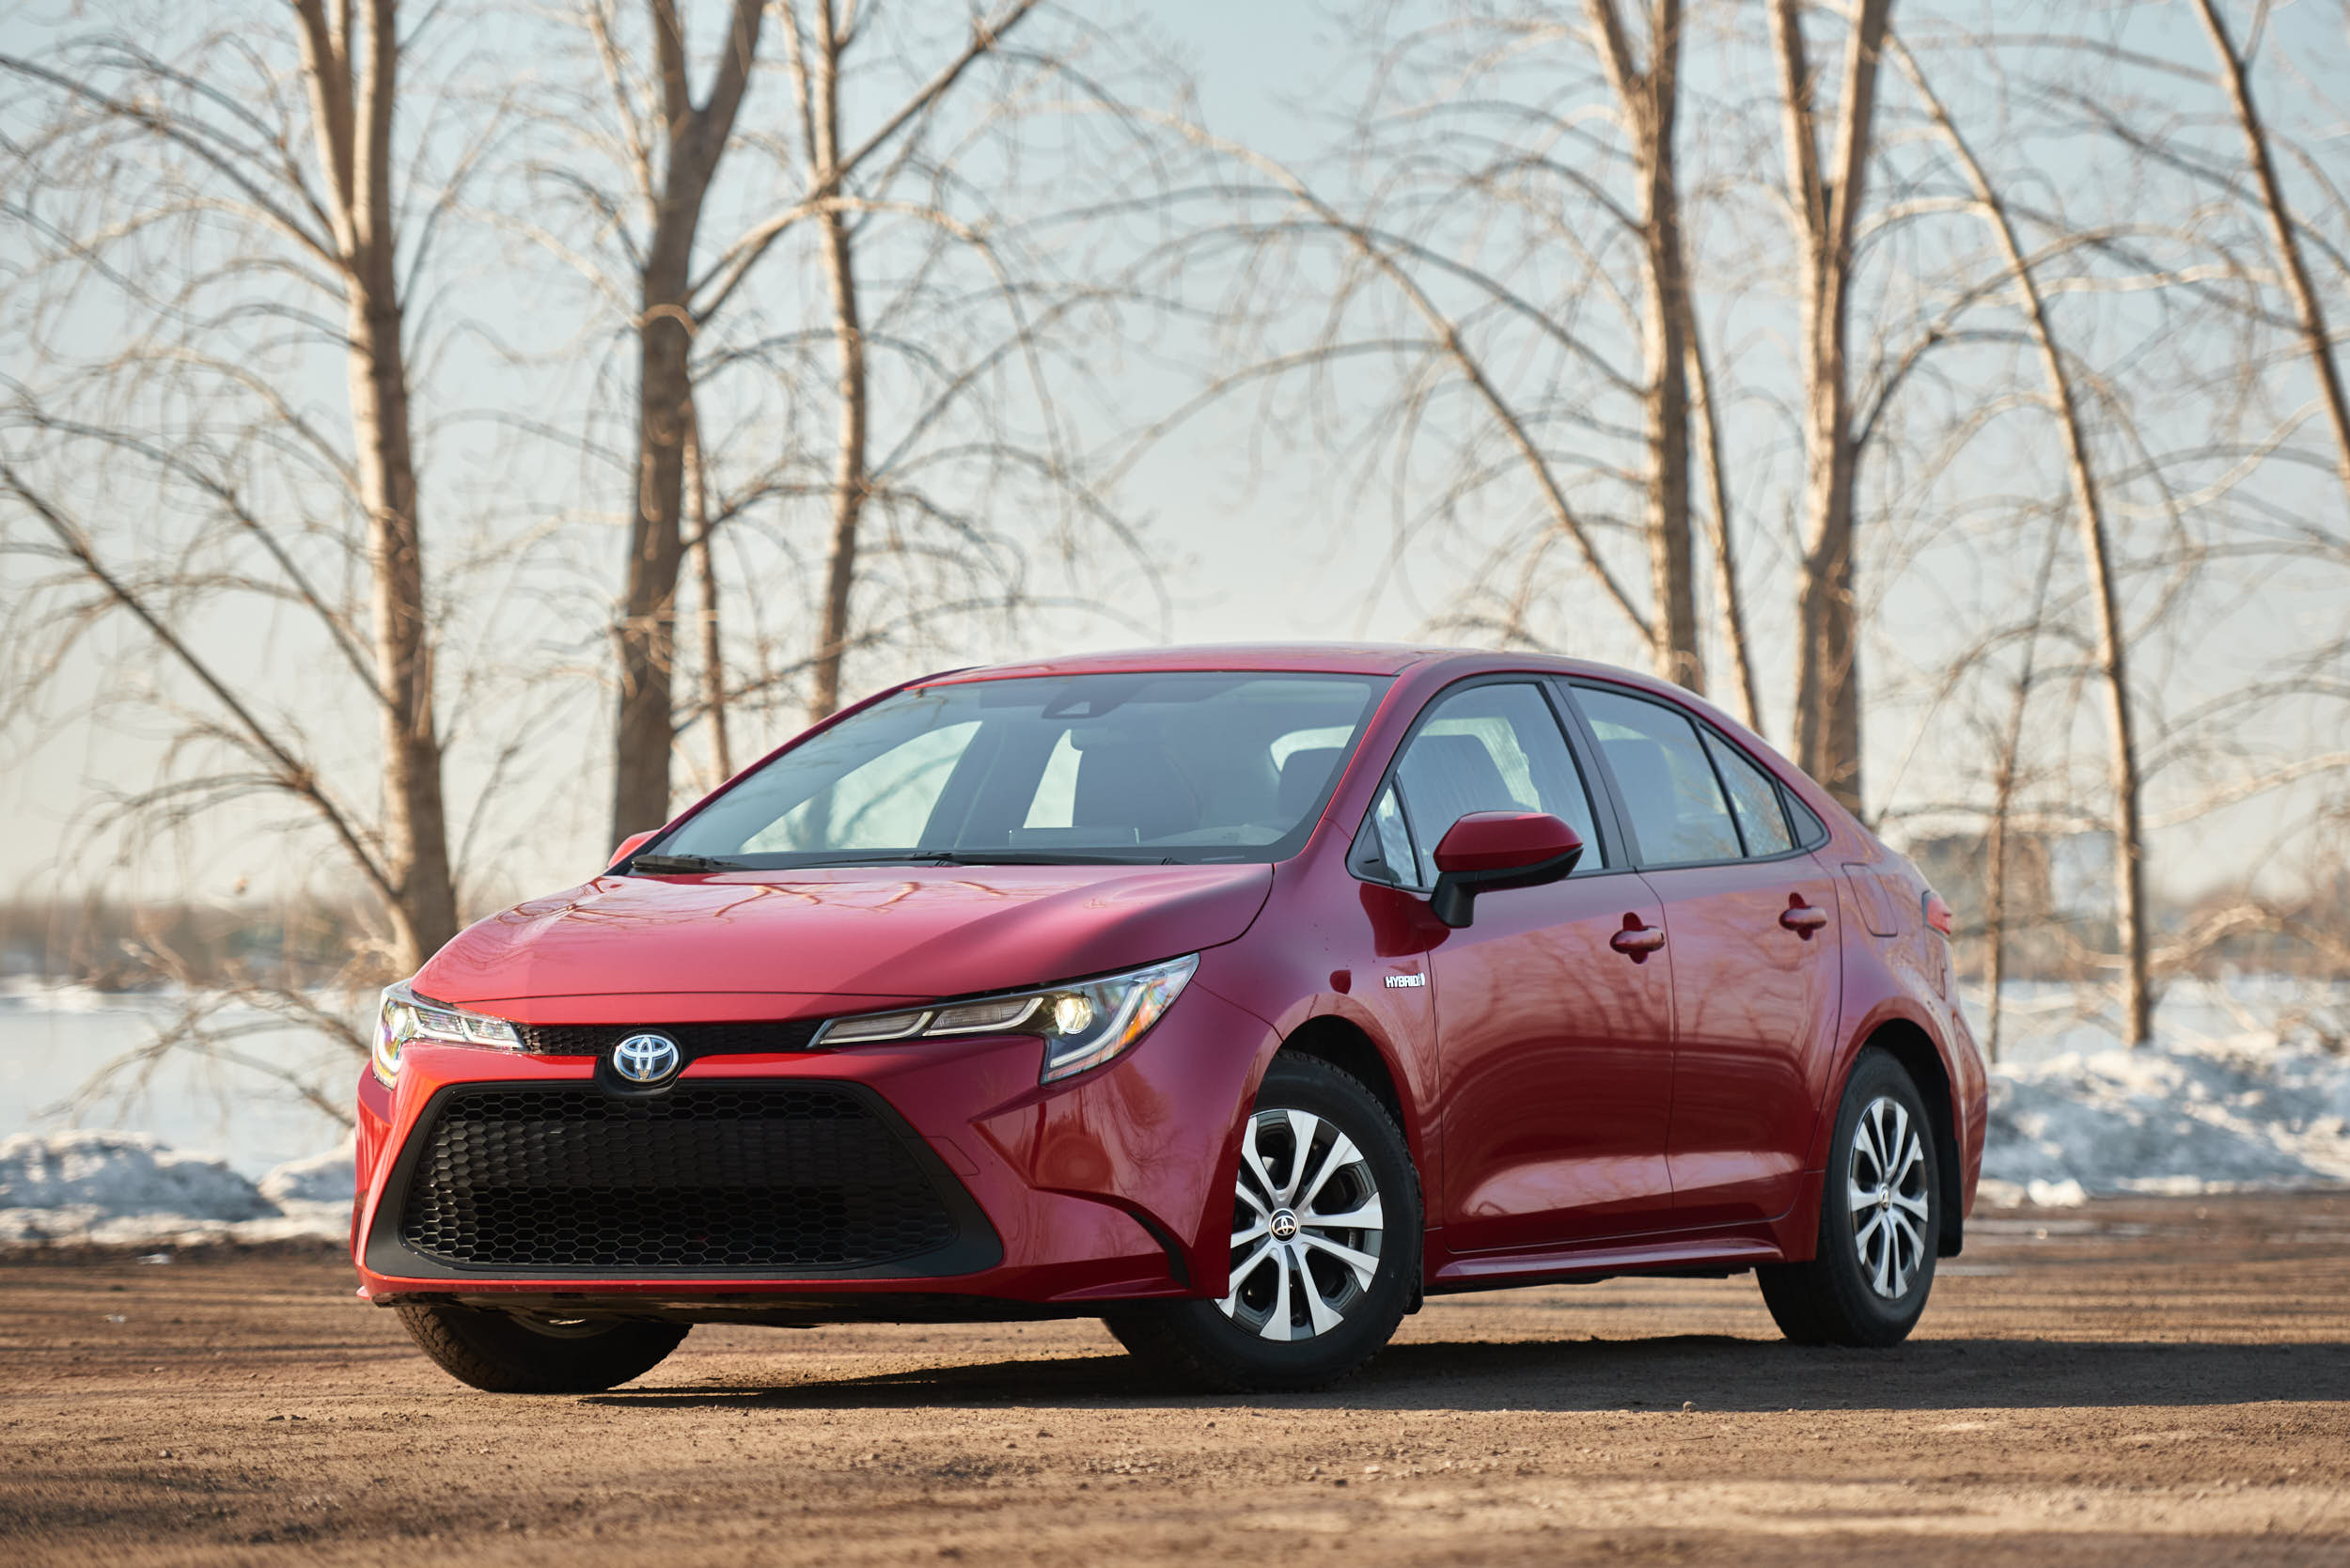 2021 Toyota Corolla Hybrid May Very Well Be The Perfect People�s Car